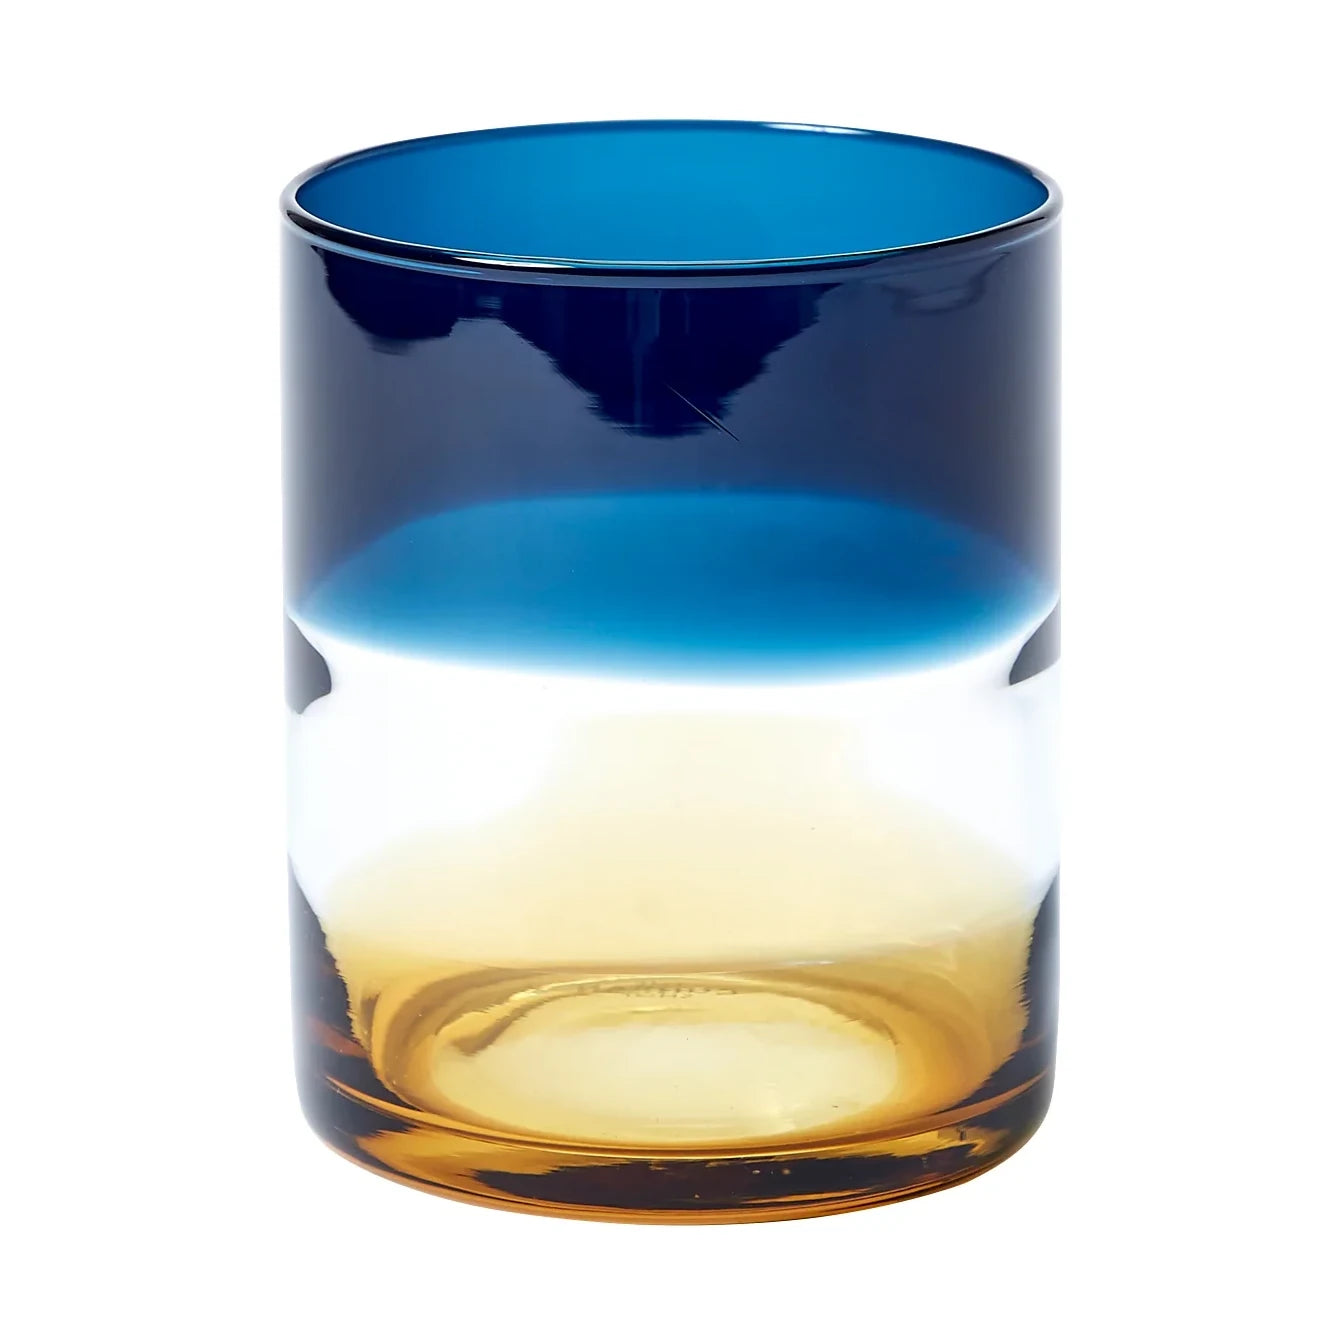 Ombre Tumbler in blue and amber by The Conran Shop